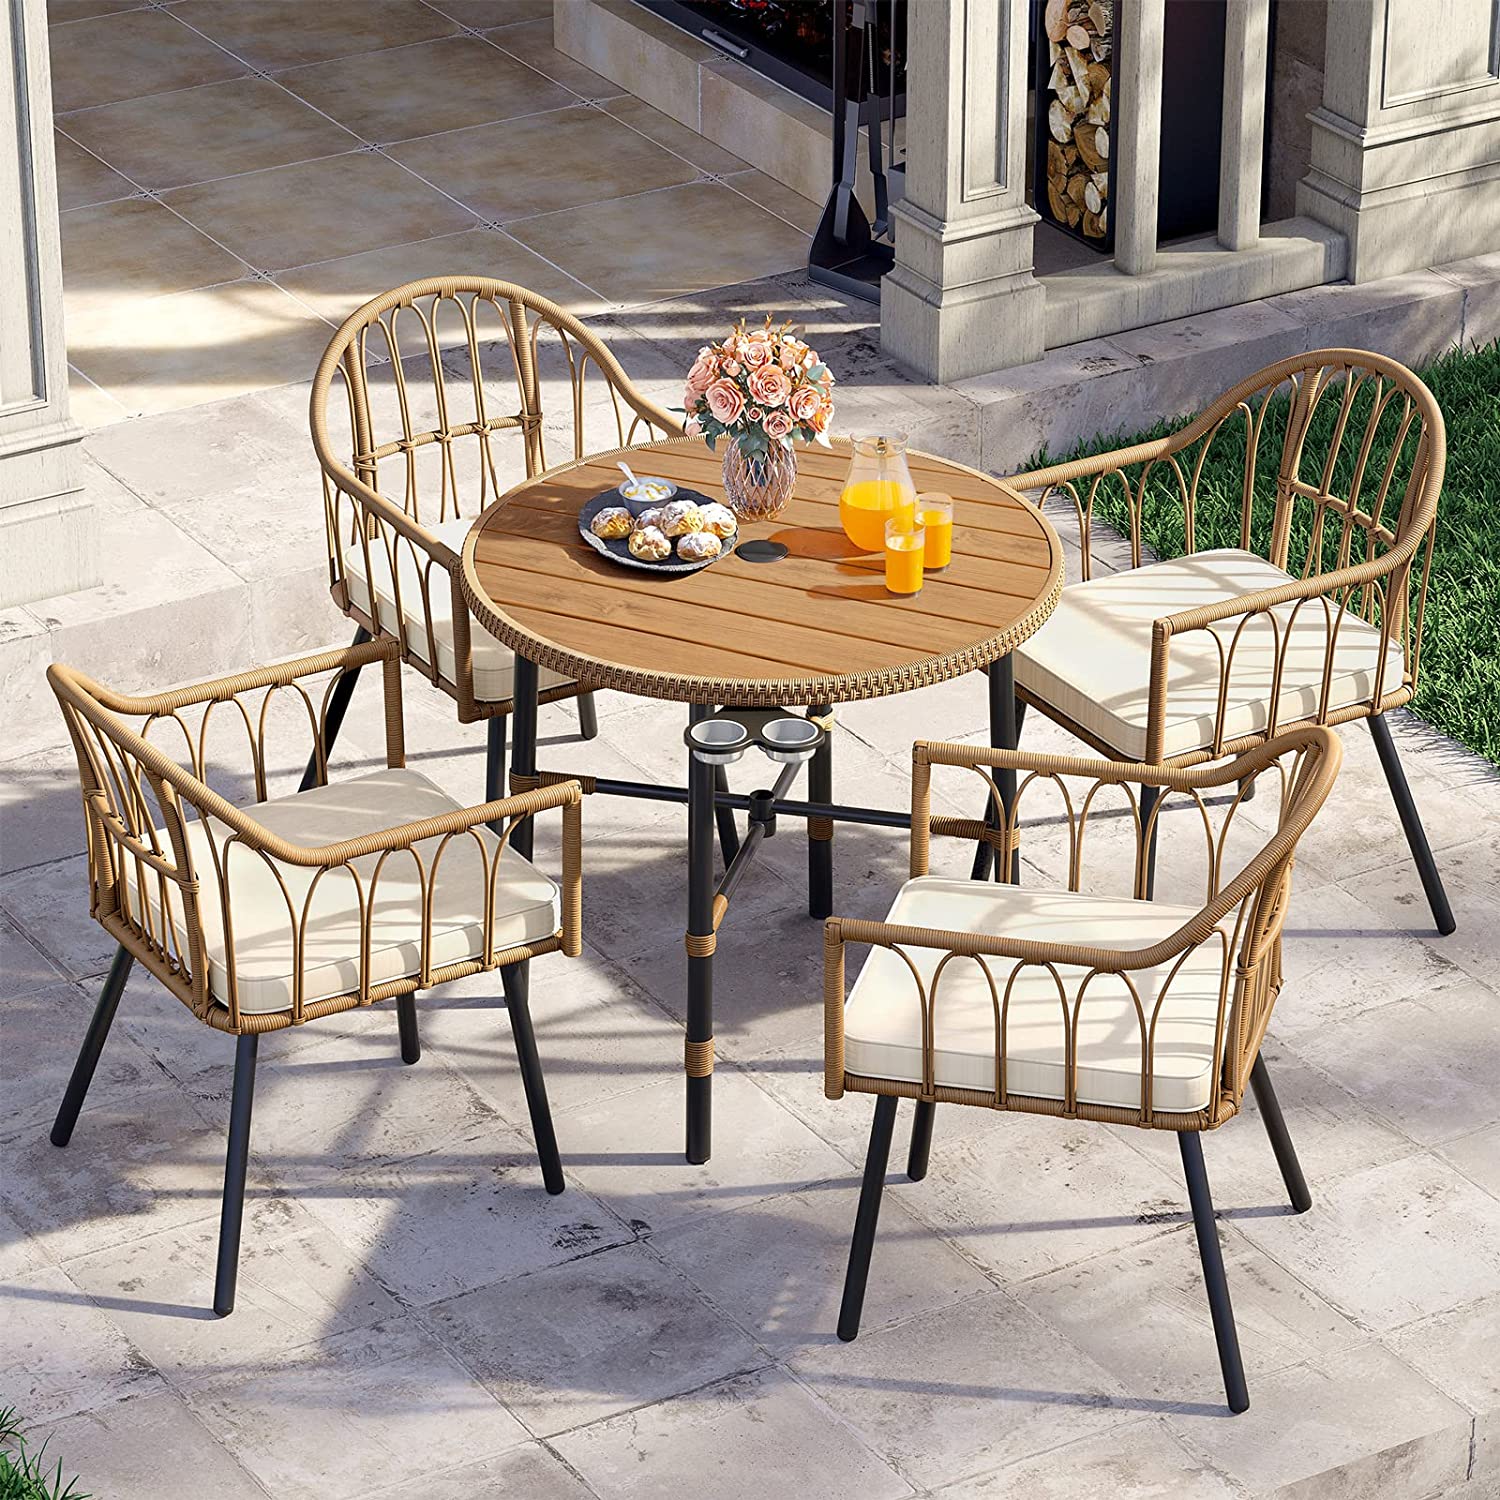 Dextrus 5 pieces Outdoor Patio Dining Table Set, 4 Rattan Wicker Dining Chair and Round Table With Umbrella Hole, Sectional Conversation Set for Backyard, Balcony, Garden, Lawn - image 5 of 9